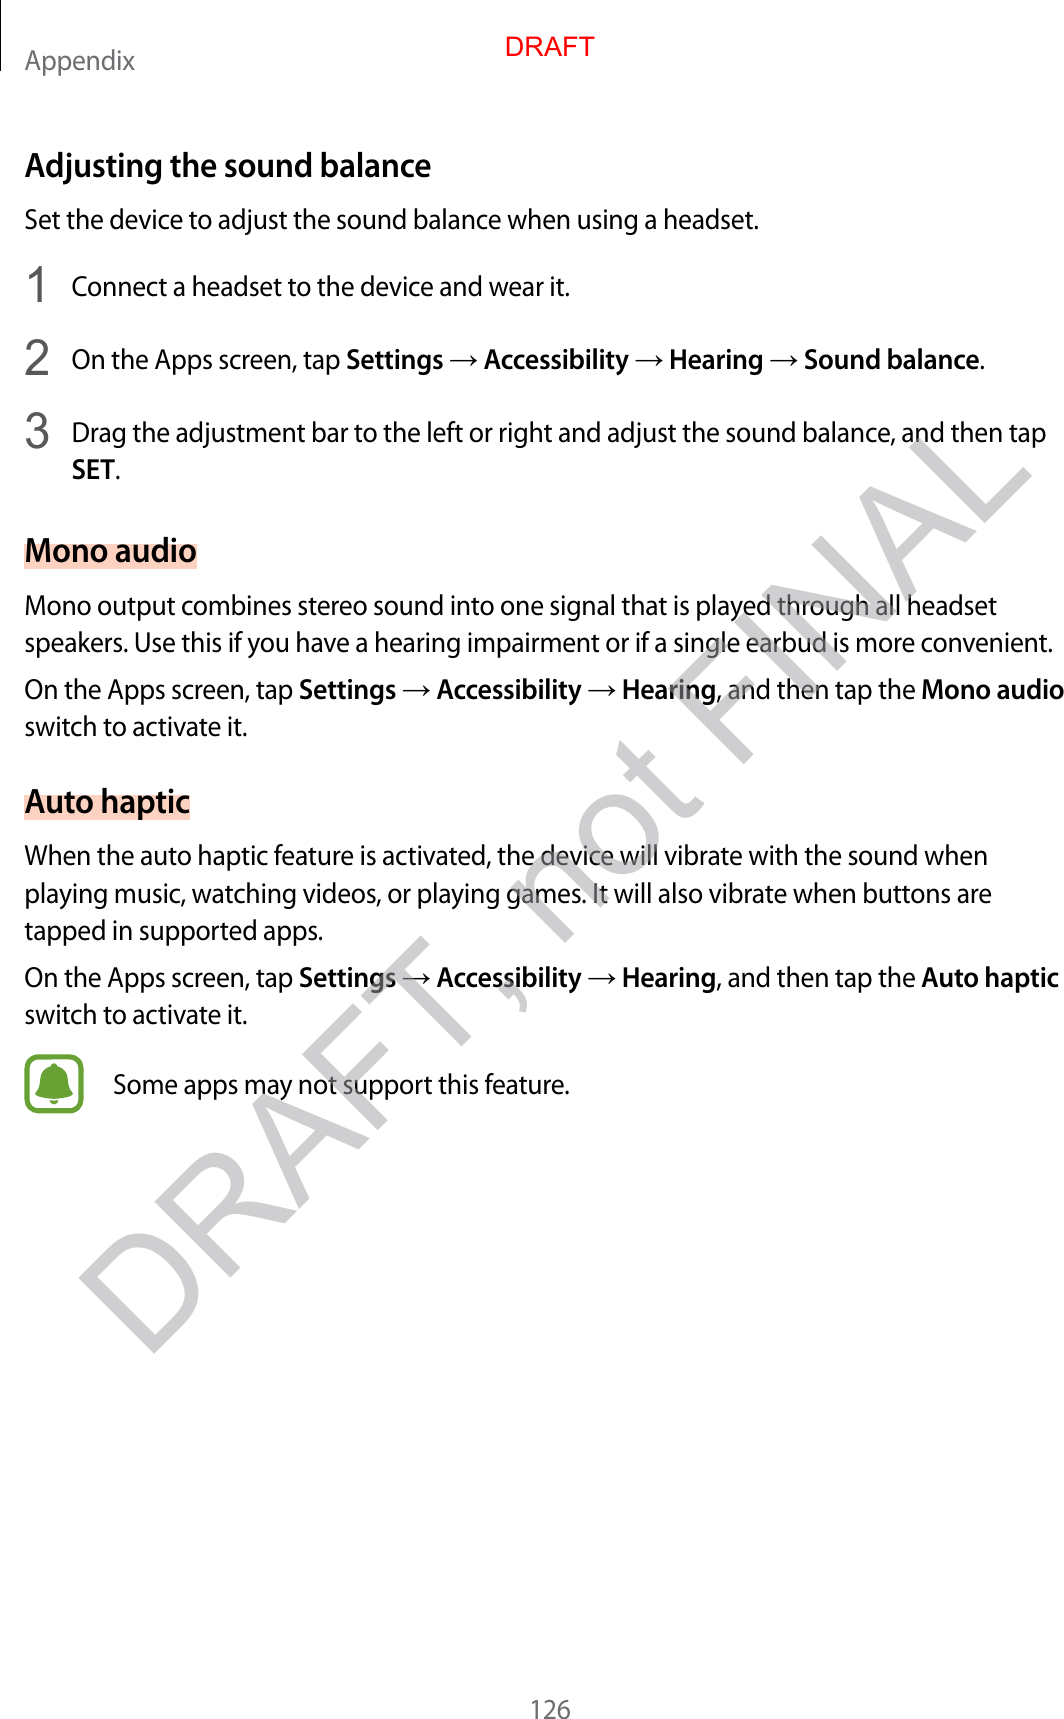 Appendix126Adjusting the sound balanc eSet the device to adjust the sound balance when using a headset.1  Connect a headset to the device and w ear it.2  On the Apps screen, tap Settings  Accessibility  Hearing  Sound balance.3  Drag the adjustment bar to the left or right and adjust the sound balance , and then tap SET.Mono audioMono output combines stereo sound in to one sig nal that is pla y ed thr ough all headset speakers. Use this if y ou ha v e a hearing impairment or if a single earbud is more c on v enien t.On the Apps screen, tap Settings  Accessibility  Hearing, and then tap the Mono audio switch to activate it.Aut o hapticWhen the auto haptic f ea tur e is activated , the device will vibr at e with the sound when playing music , wat ching videos , or pla ying games . It will also vibrate when buttons ar e tapped in supported apps.On the Apps screen, tap Settings  Accessibility  Hearing, and then tap the Aut o haptic switch to activate it.Some apps may not support this fea tur e .DRAFT, not FINALDRAFT